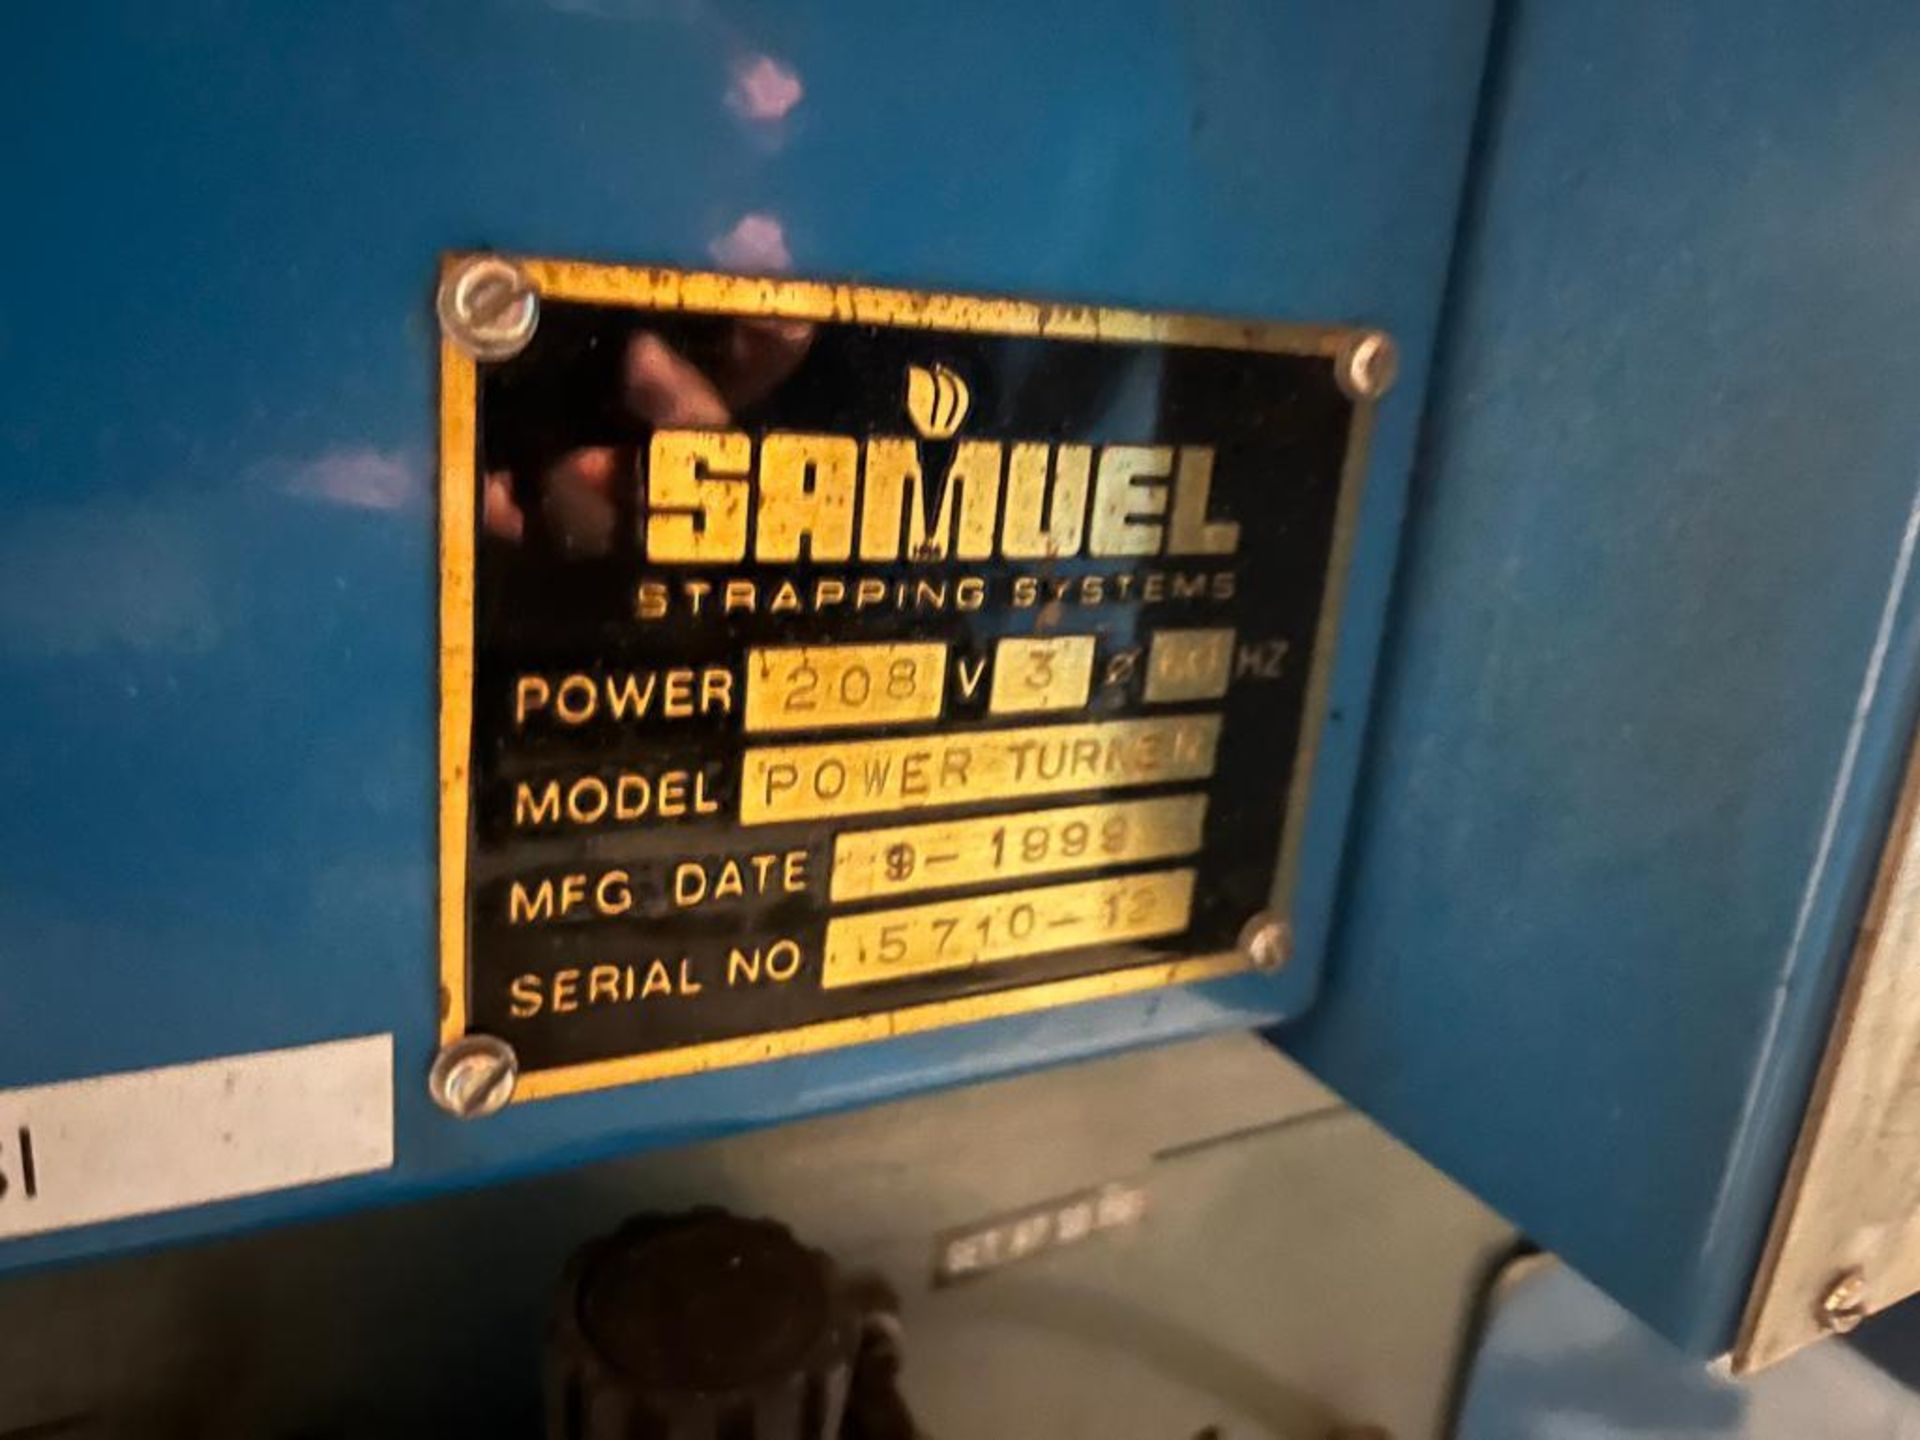 Samuel Strapping Systems Power Turner, S/N 5710-18 (1999) - Image 3 of 3